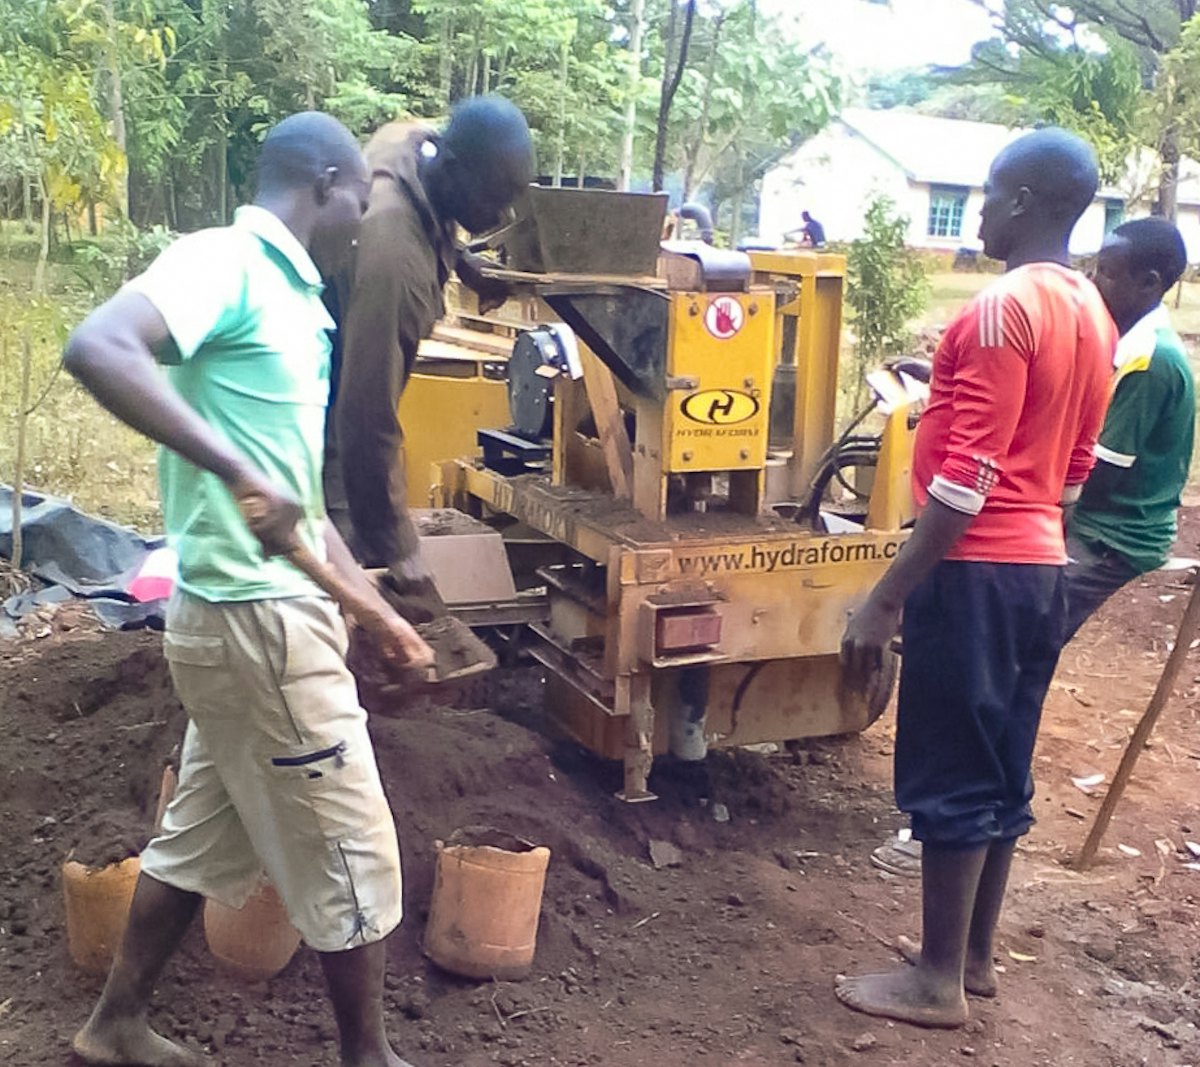 The project to build an educational facility in Namawanga used a hydraulic machine that presses bricks made mostly of soil from the site. The machine produces interlocking bricks that are simple to assemble with no need for mortar.